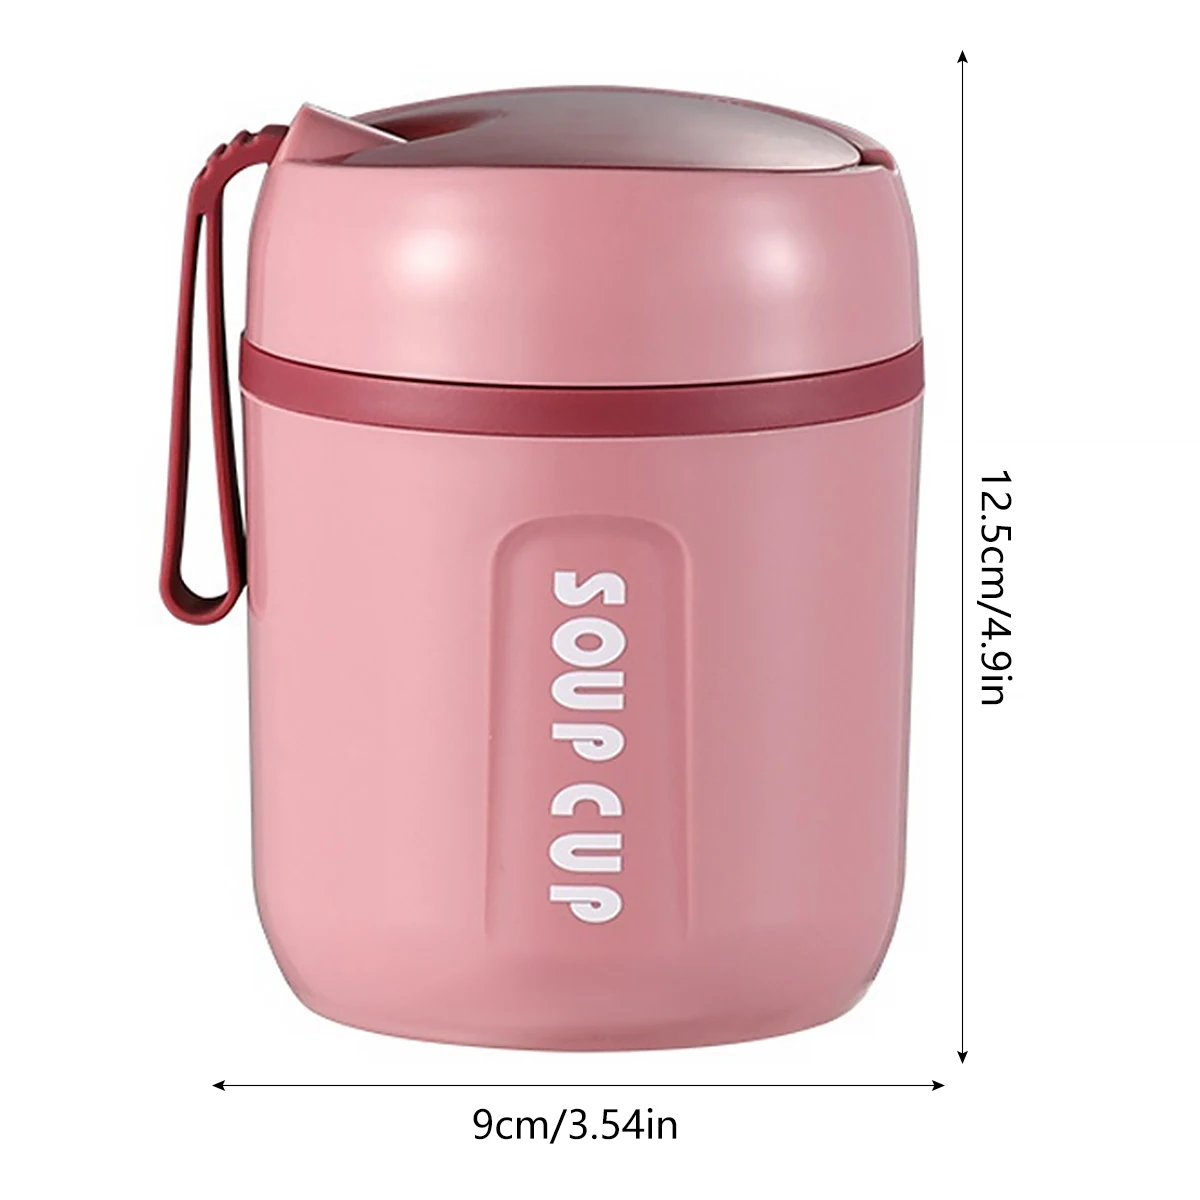 Stainless Steel and Silicone Food Container for Children and Adults